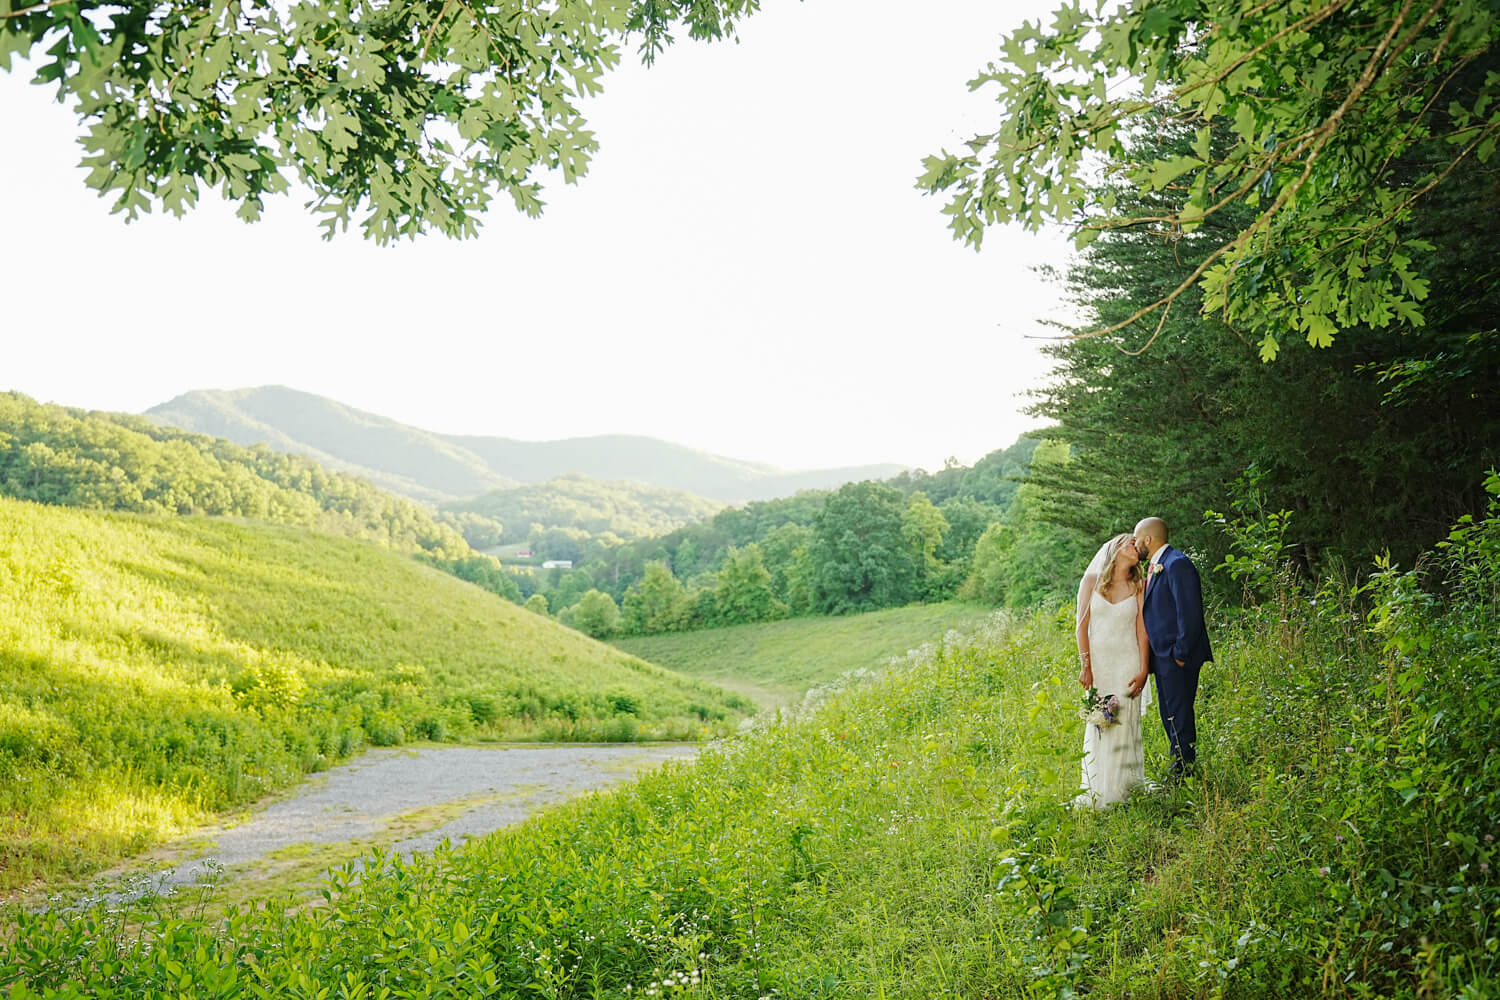 Wedding Couple at a mountain view in a field with summer trees framing the scene